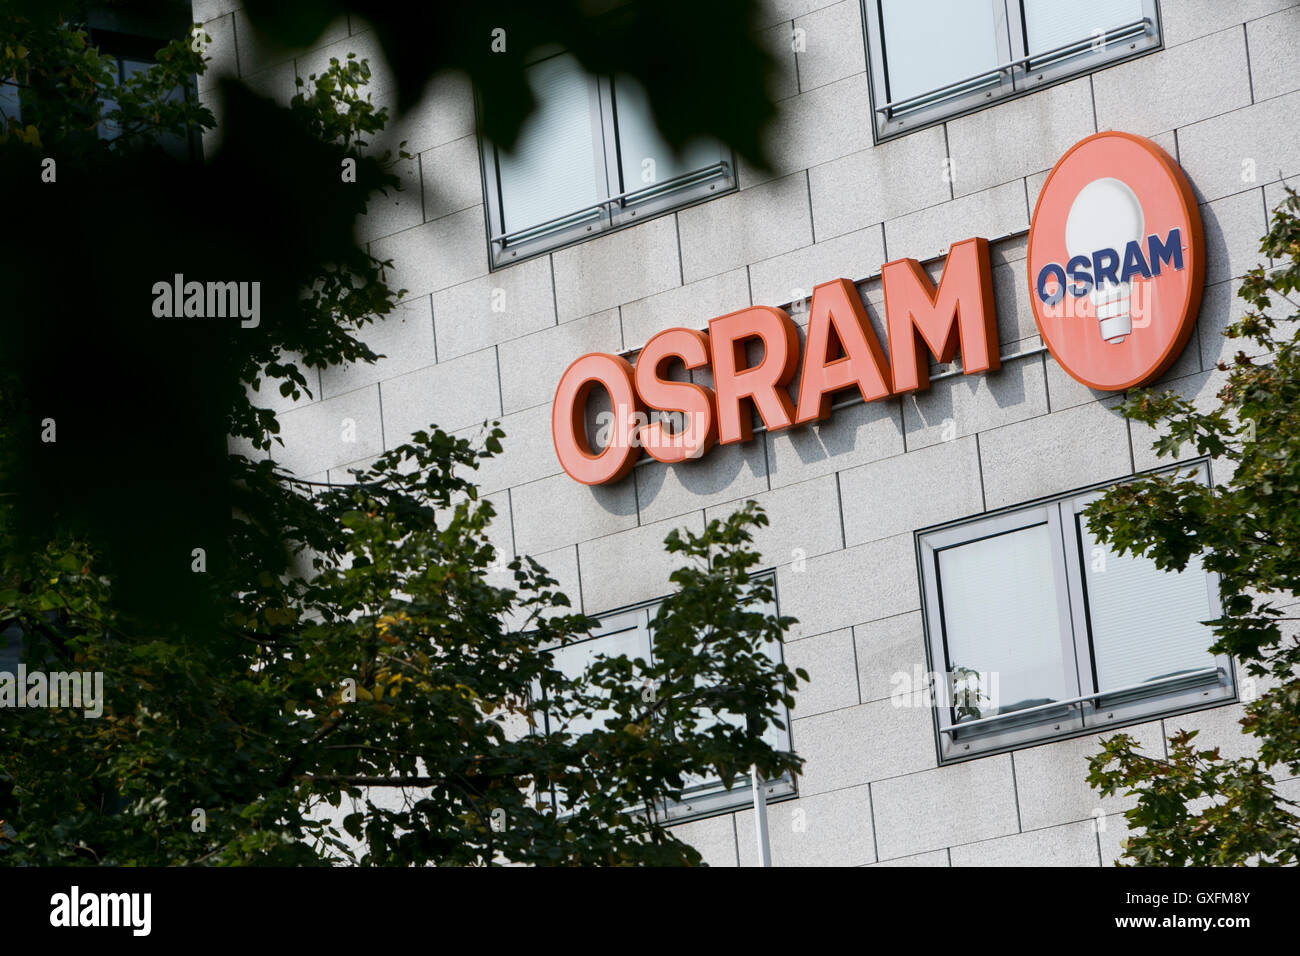 A logo sign outside of facility occupied by Osram in Milan, Italy on September 3, 2016. Stock Photo